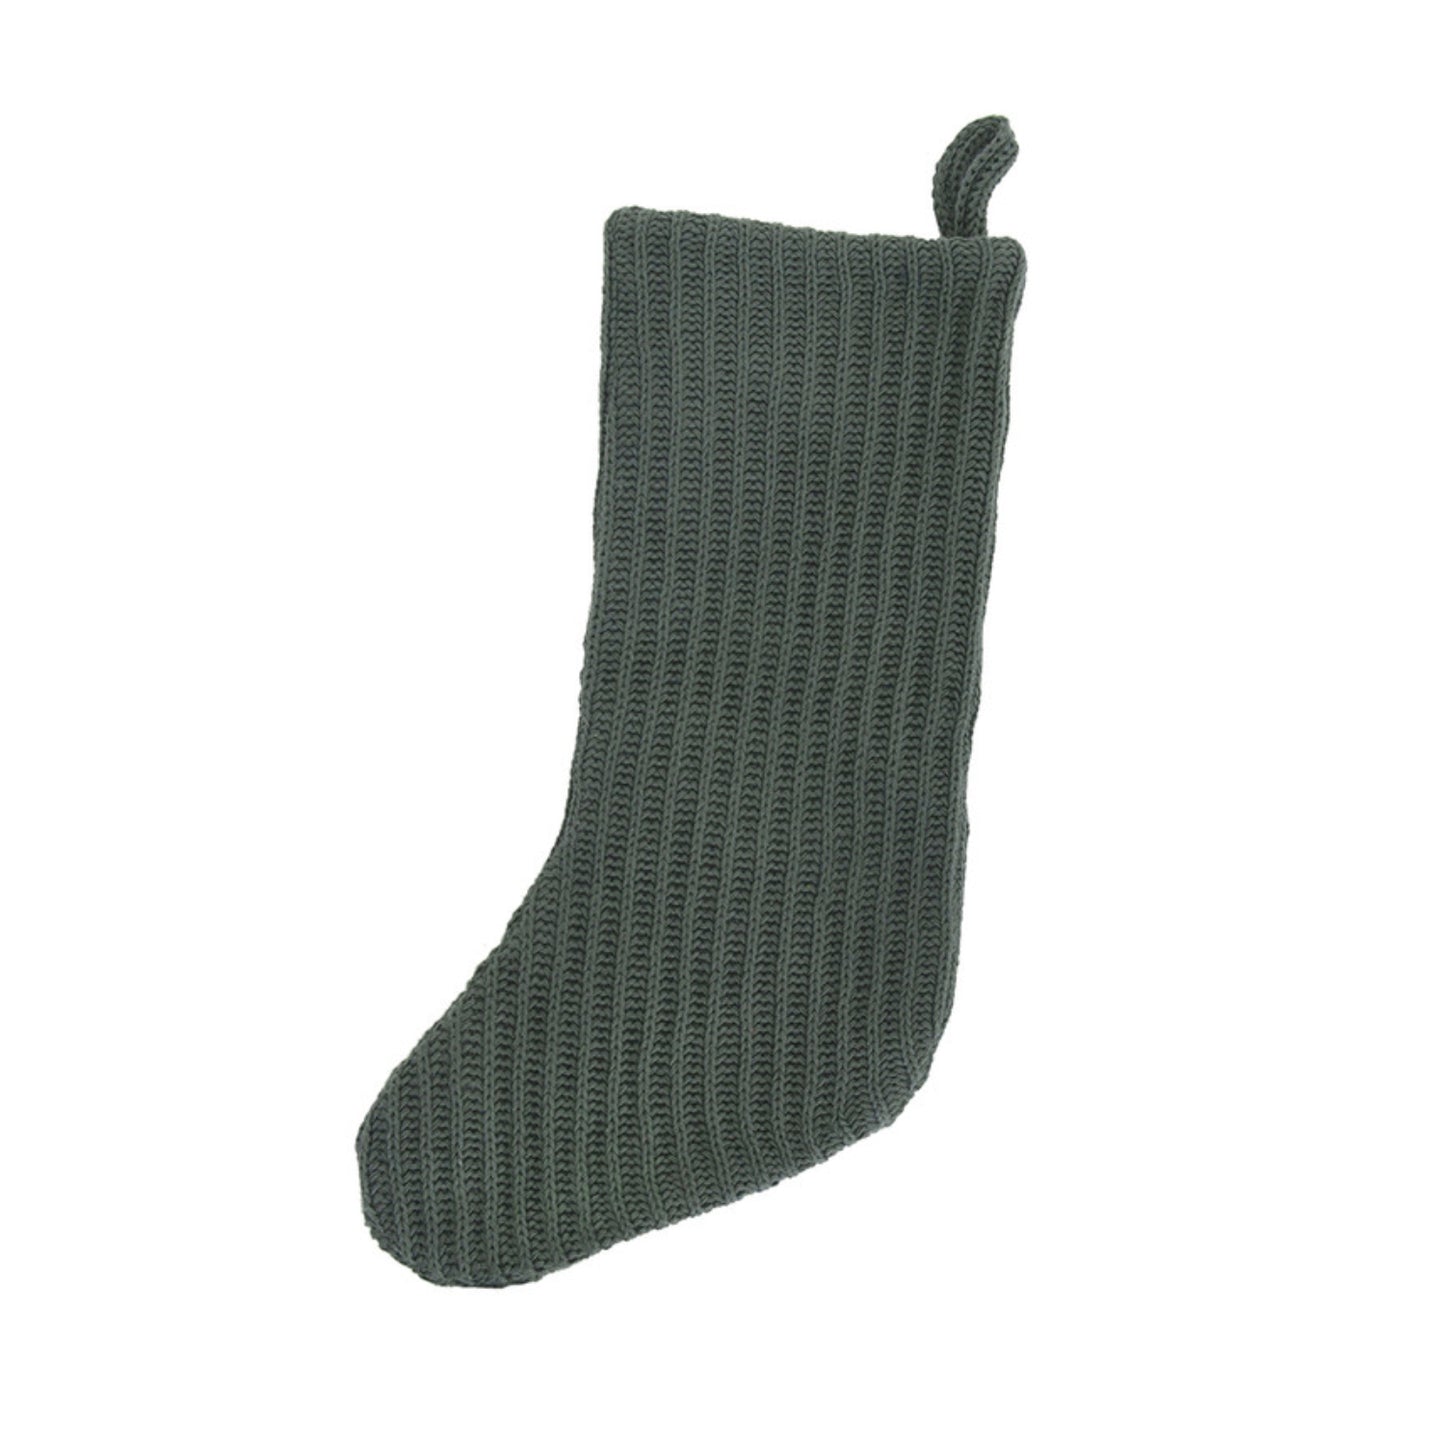 Knitted Orford Thistle Green Stocking